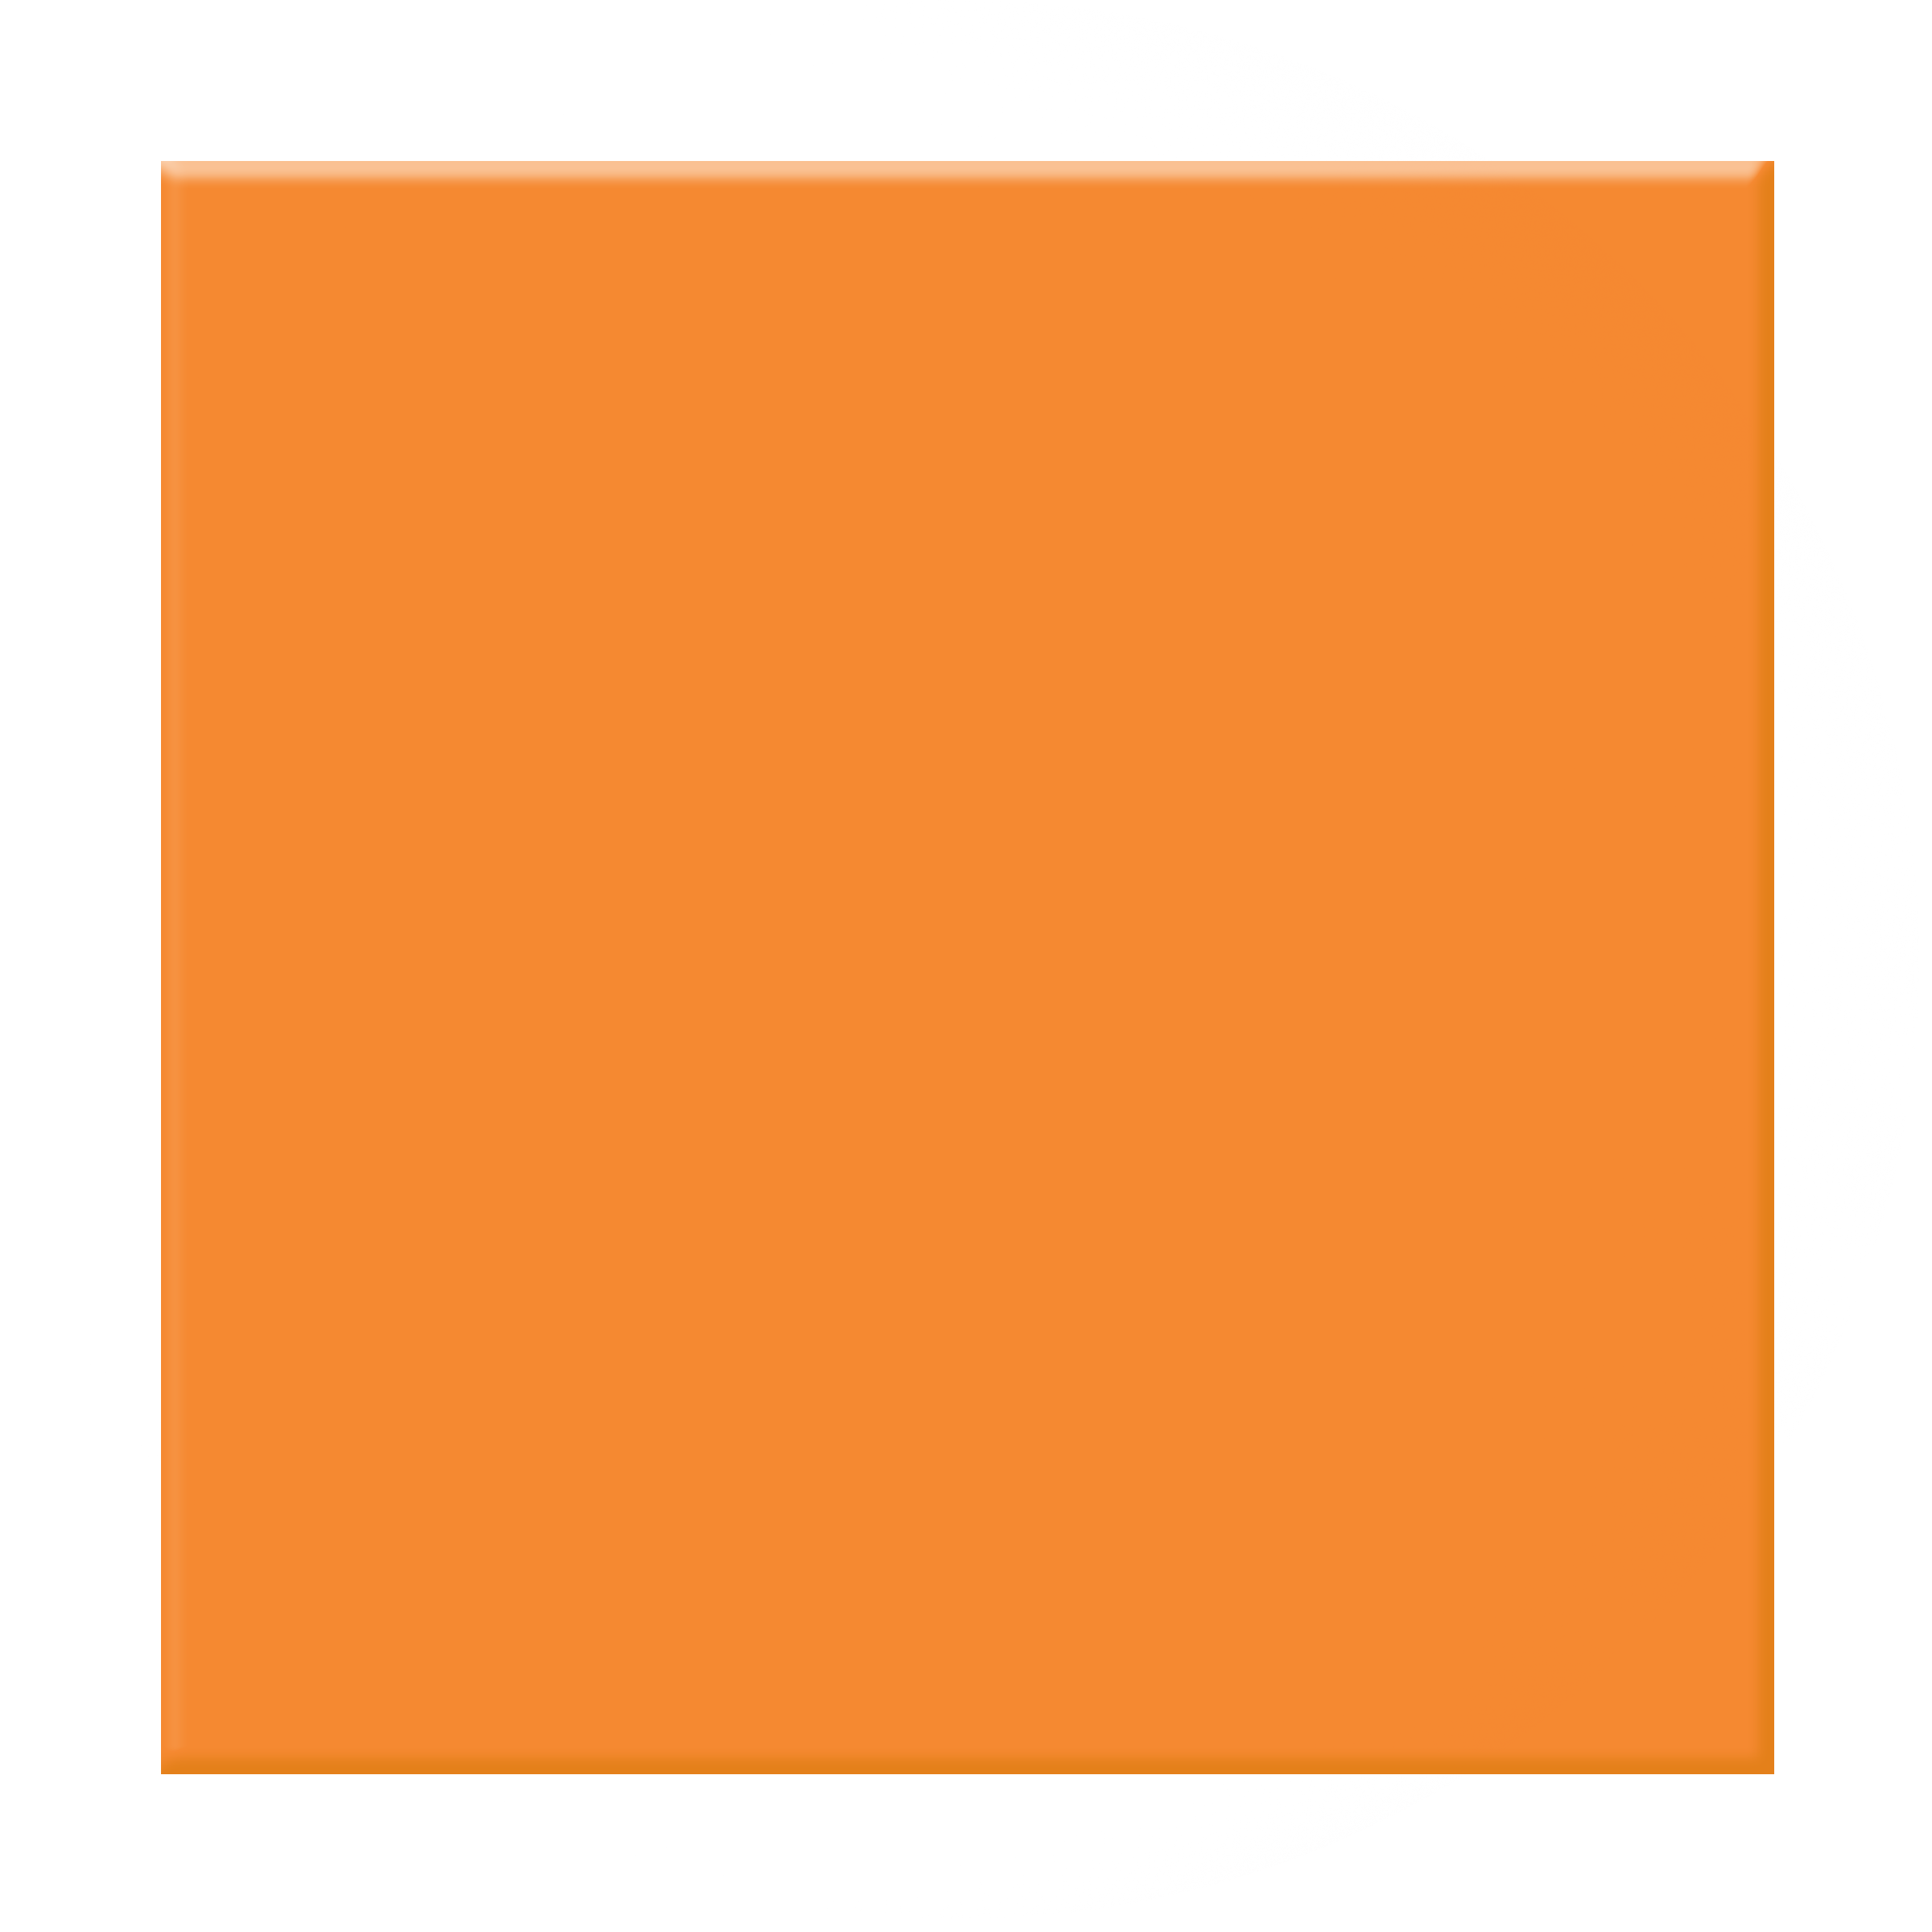 Orange Square Image PNG Transparent Background, Free Download #25130 -  FreeIconsPNG